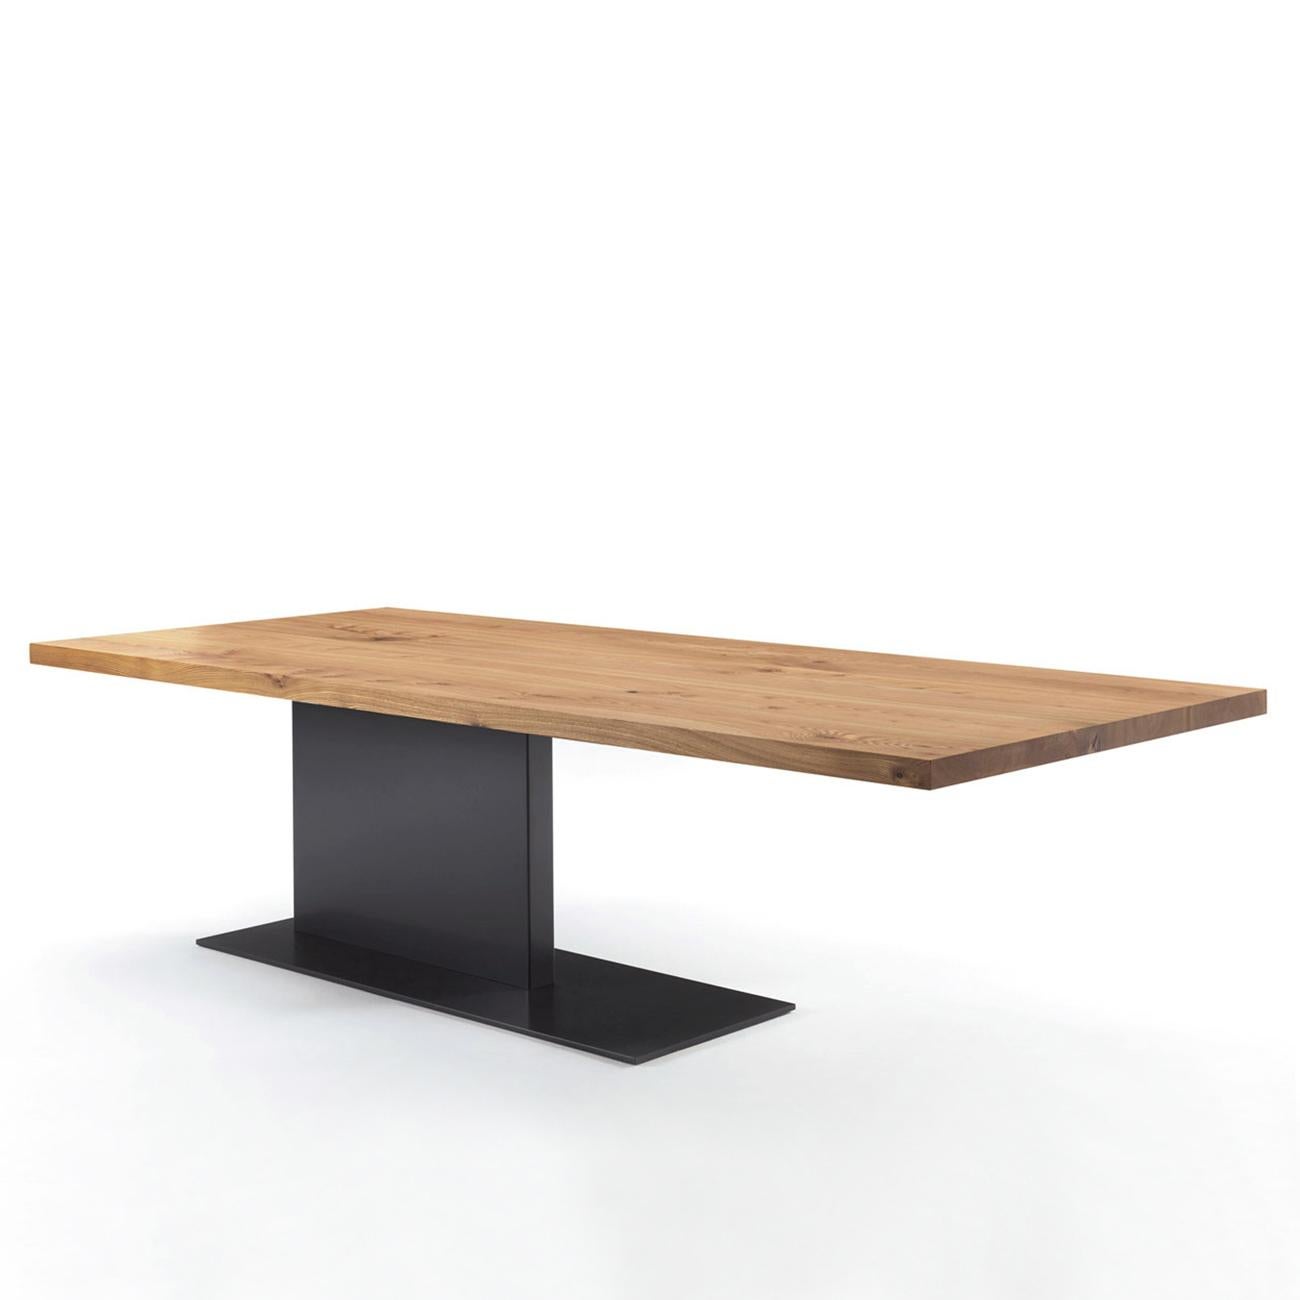 Dining Table Stage Iron with solid oak top made with glued 
oak slats, with straight edges. Base in iron in lacquered finish.
Also available with walnut top, on request.
Also available on request in:
L 200 x D 100 x H 75cm, price: 11900,00€
L